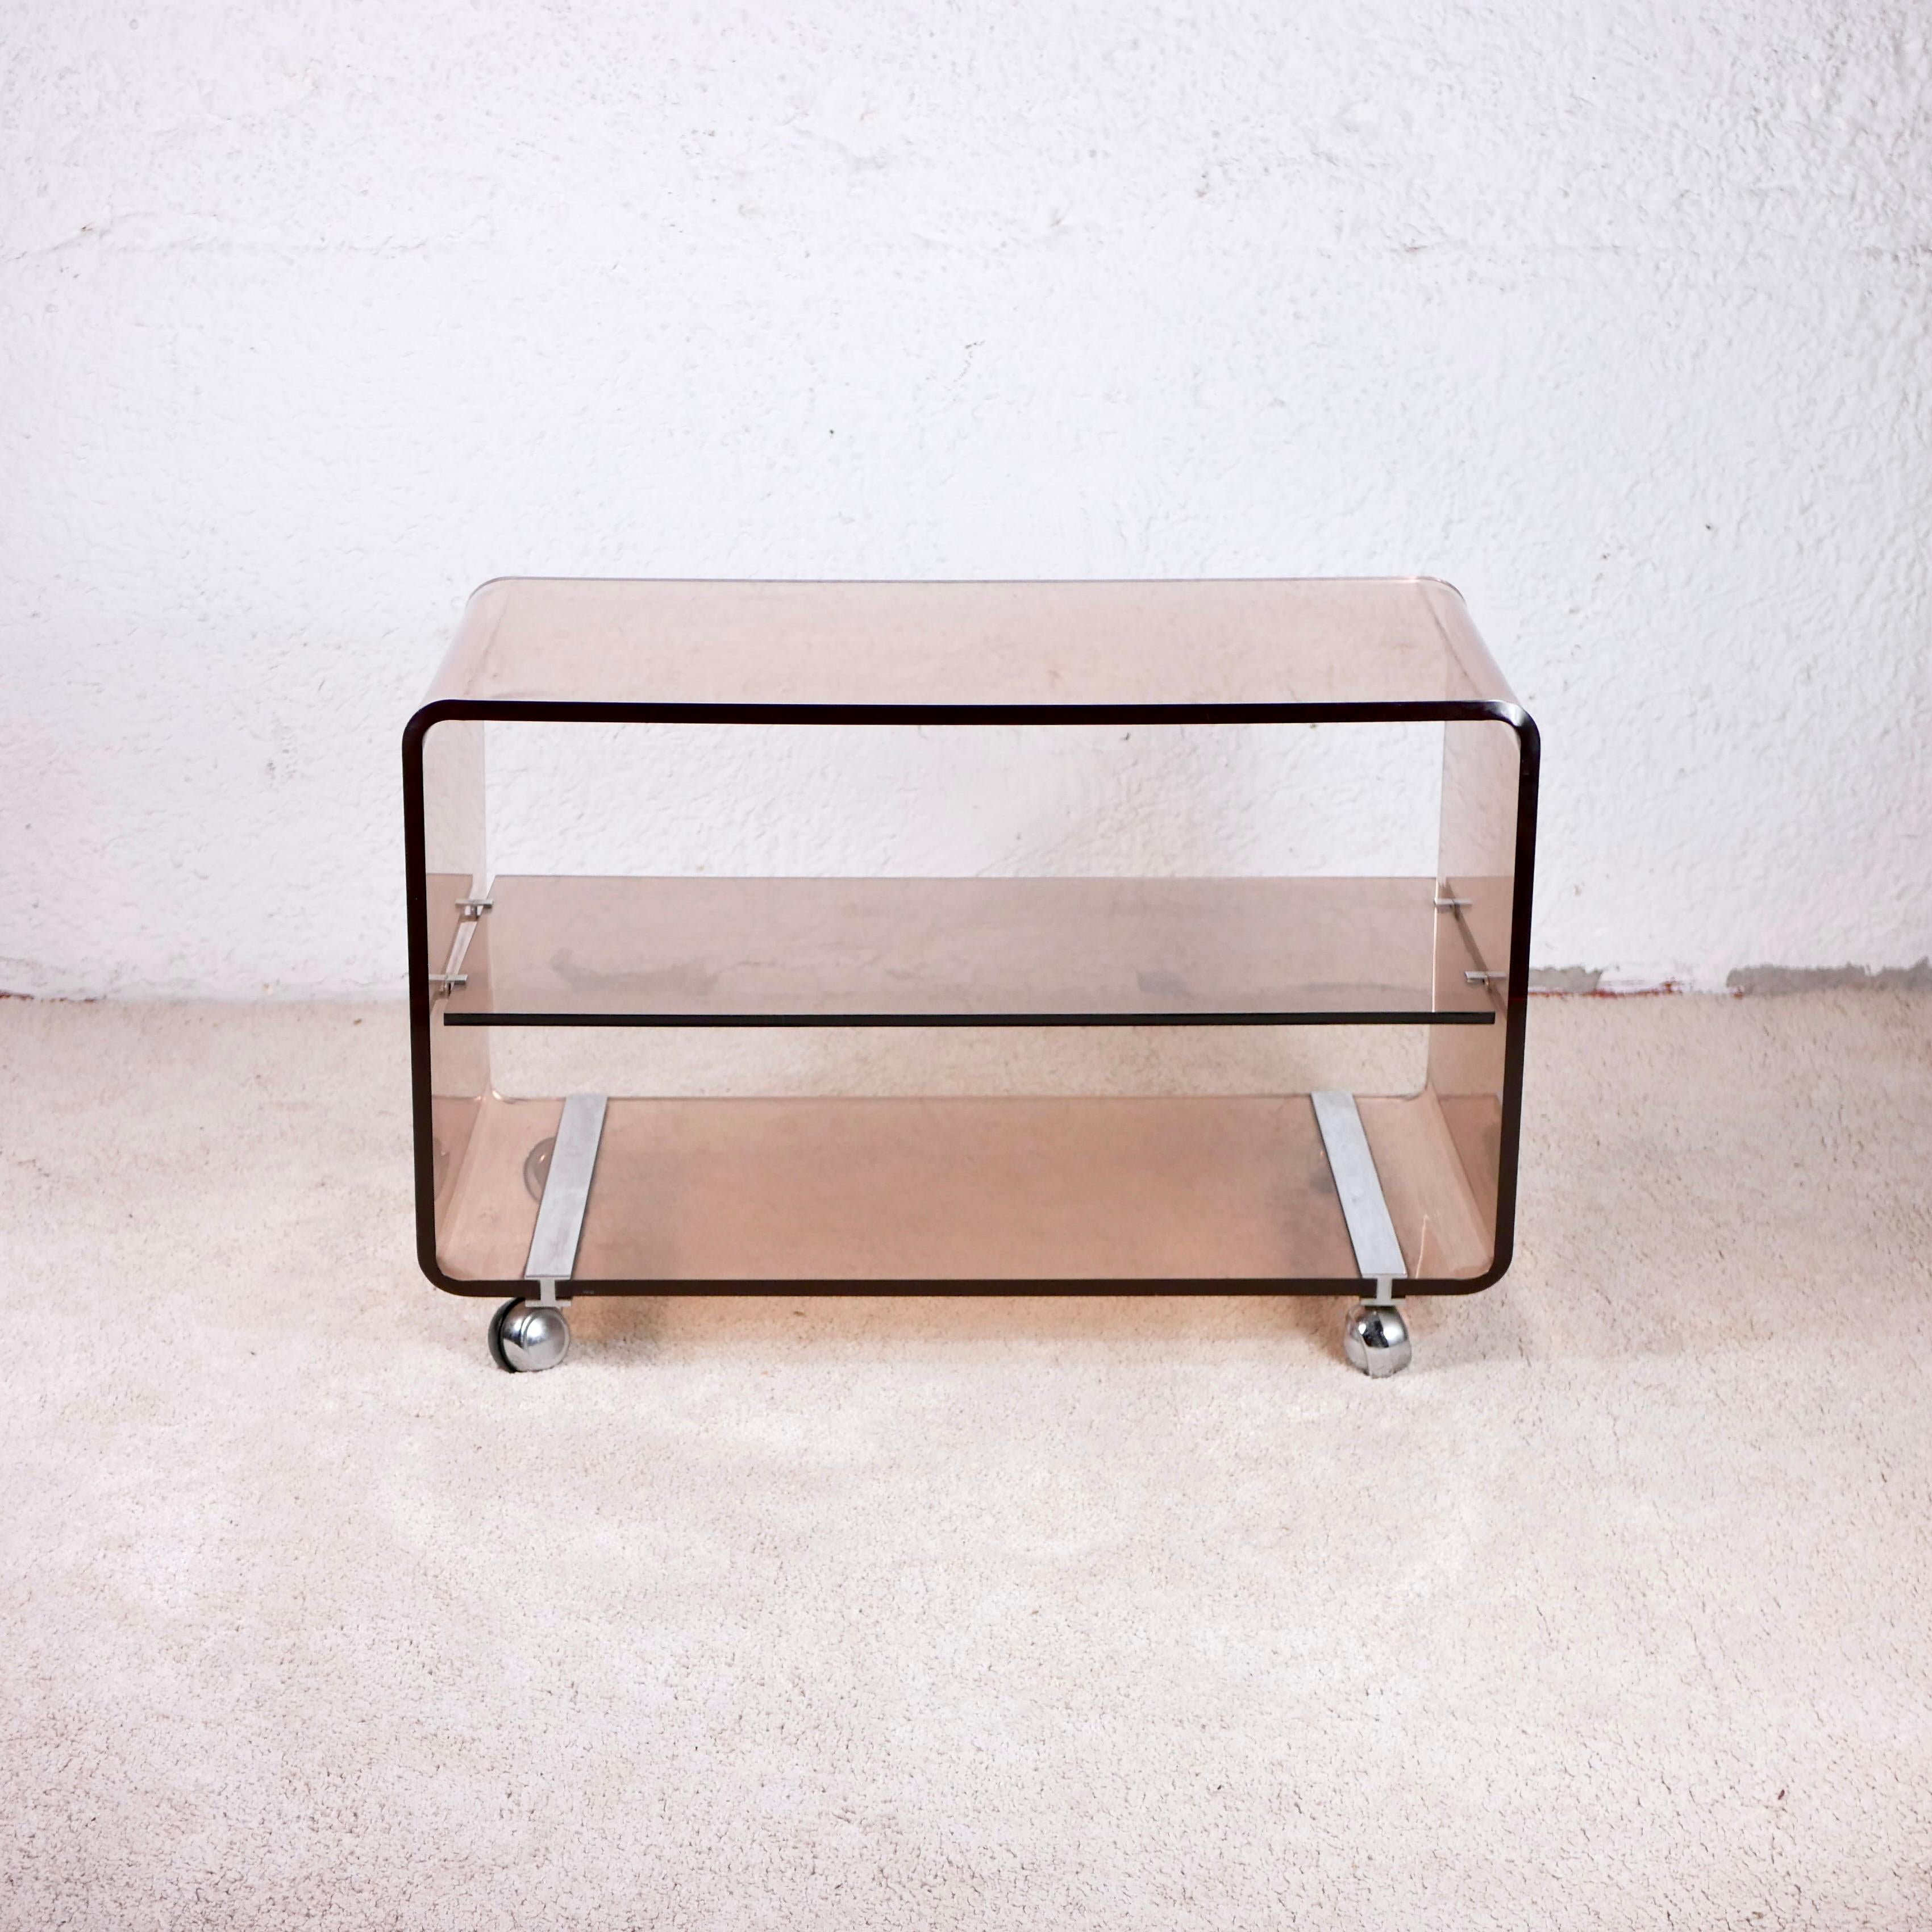 Nice side table, end table or TV table by Michel Dumas for Roche Bobois, made in the 1970s in France.
Thick and sturdy plexiglass, with a nice pink smoked shade. With wheels to move it.
A classic French design furniture.
Very good